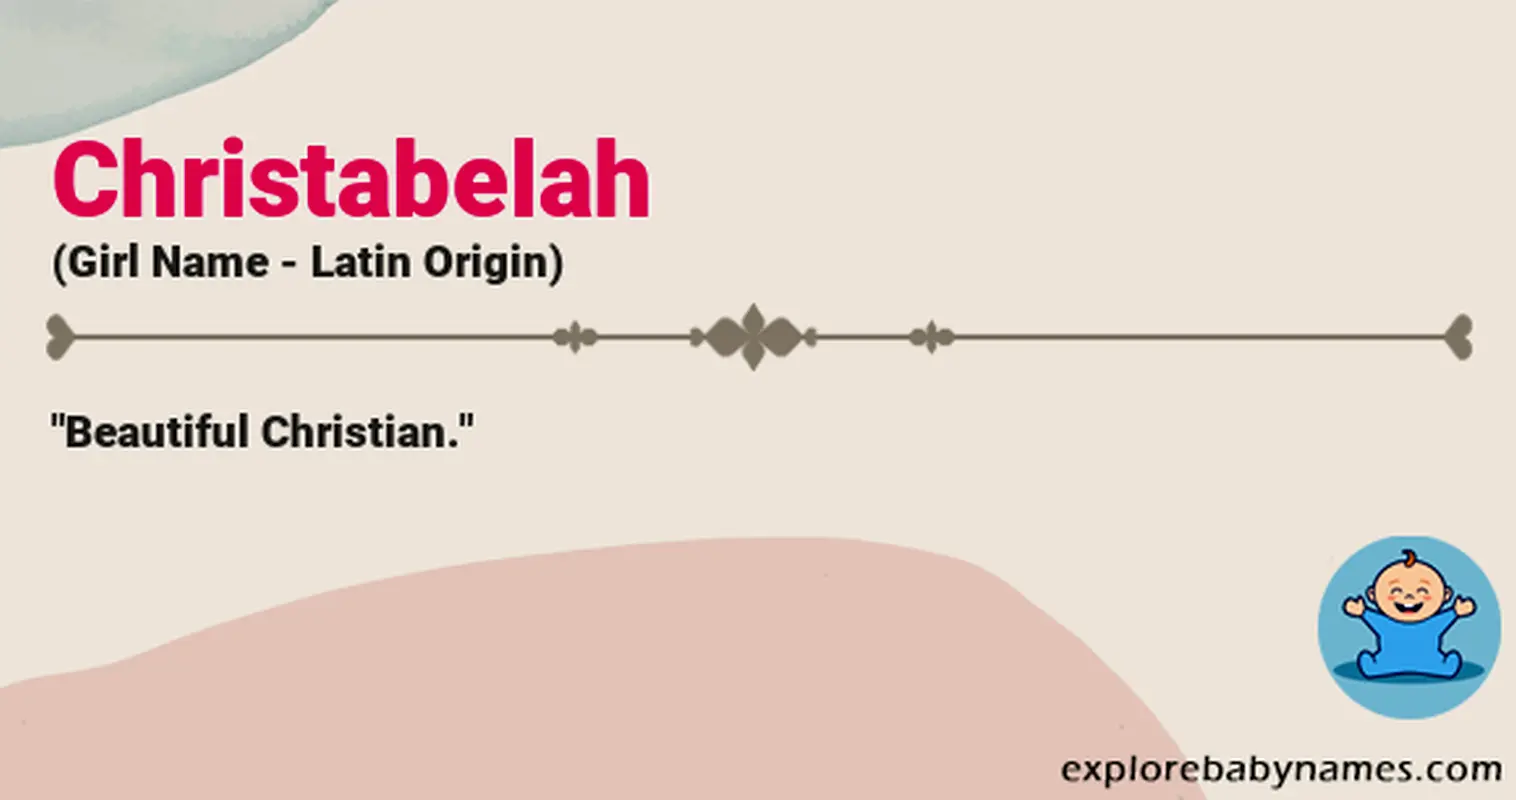 Meaning of Christabelah